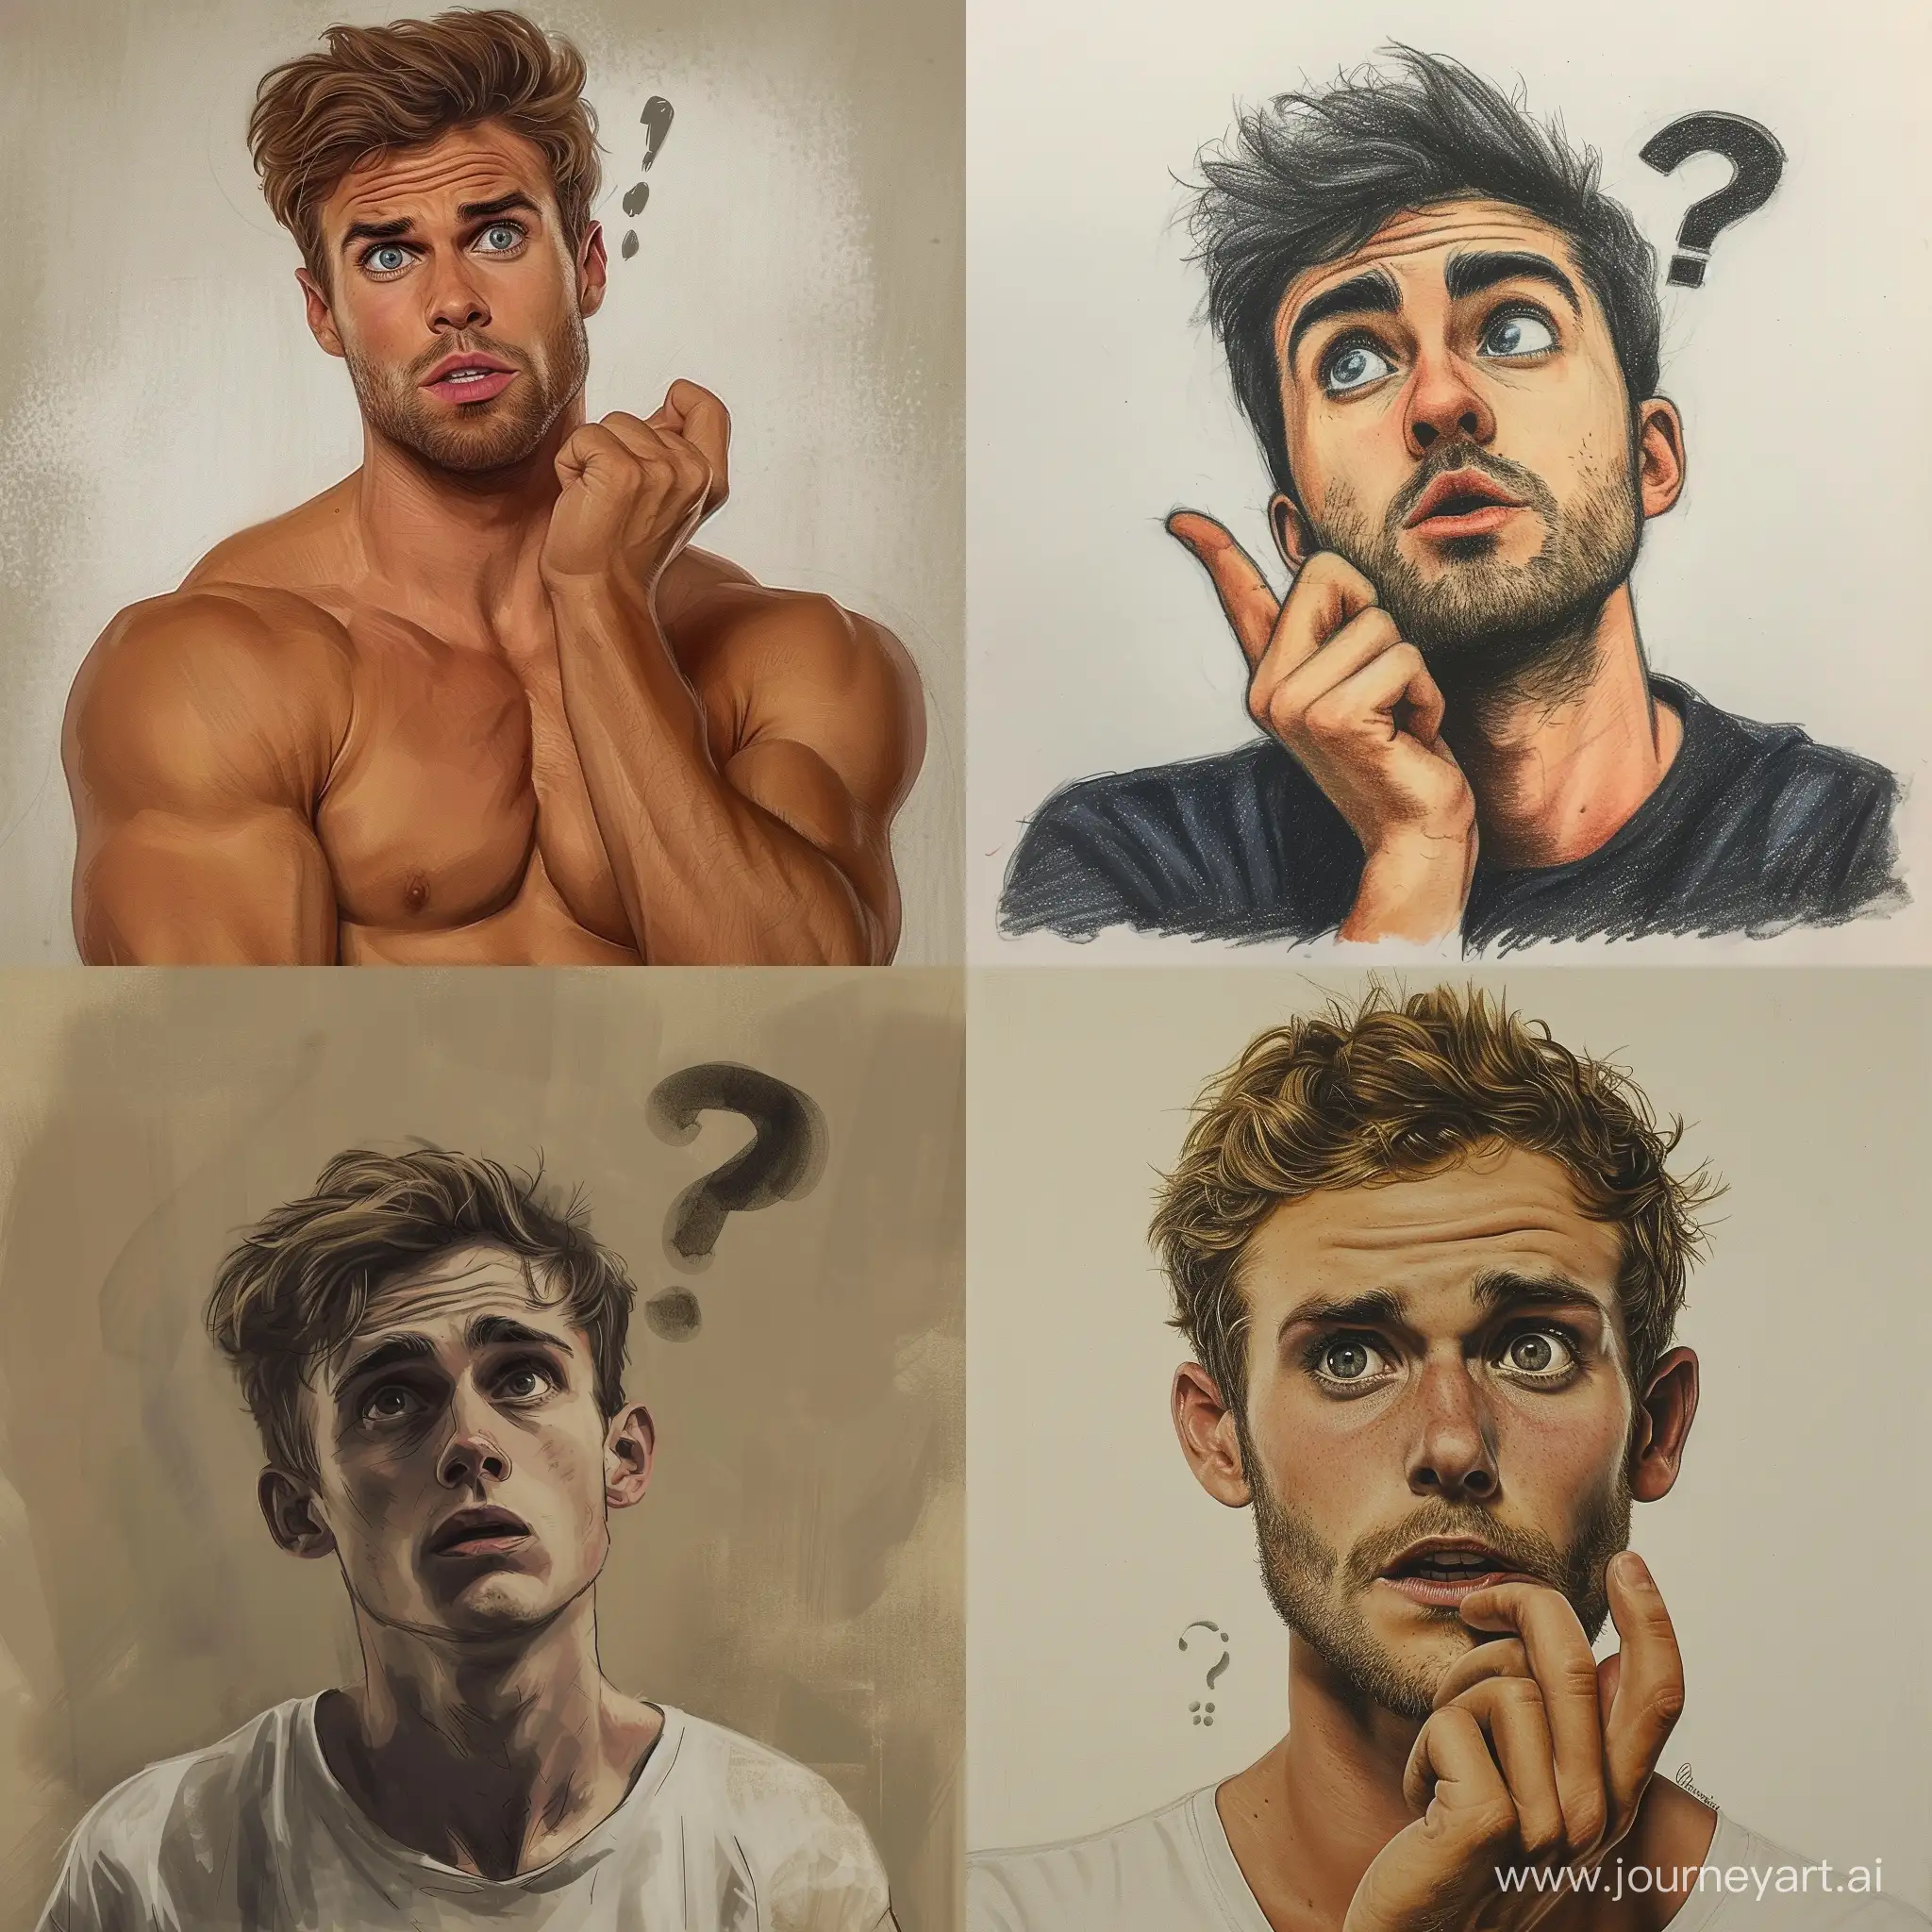 Young-European-Man-Posing-a-Question-in-Photorealistic-Portrait